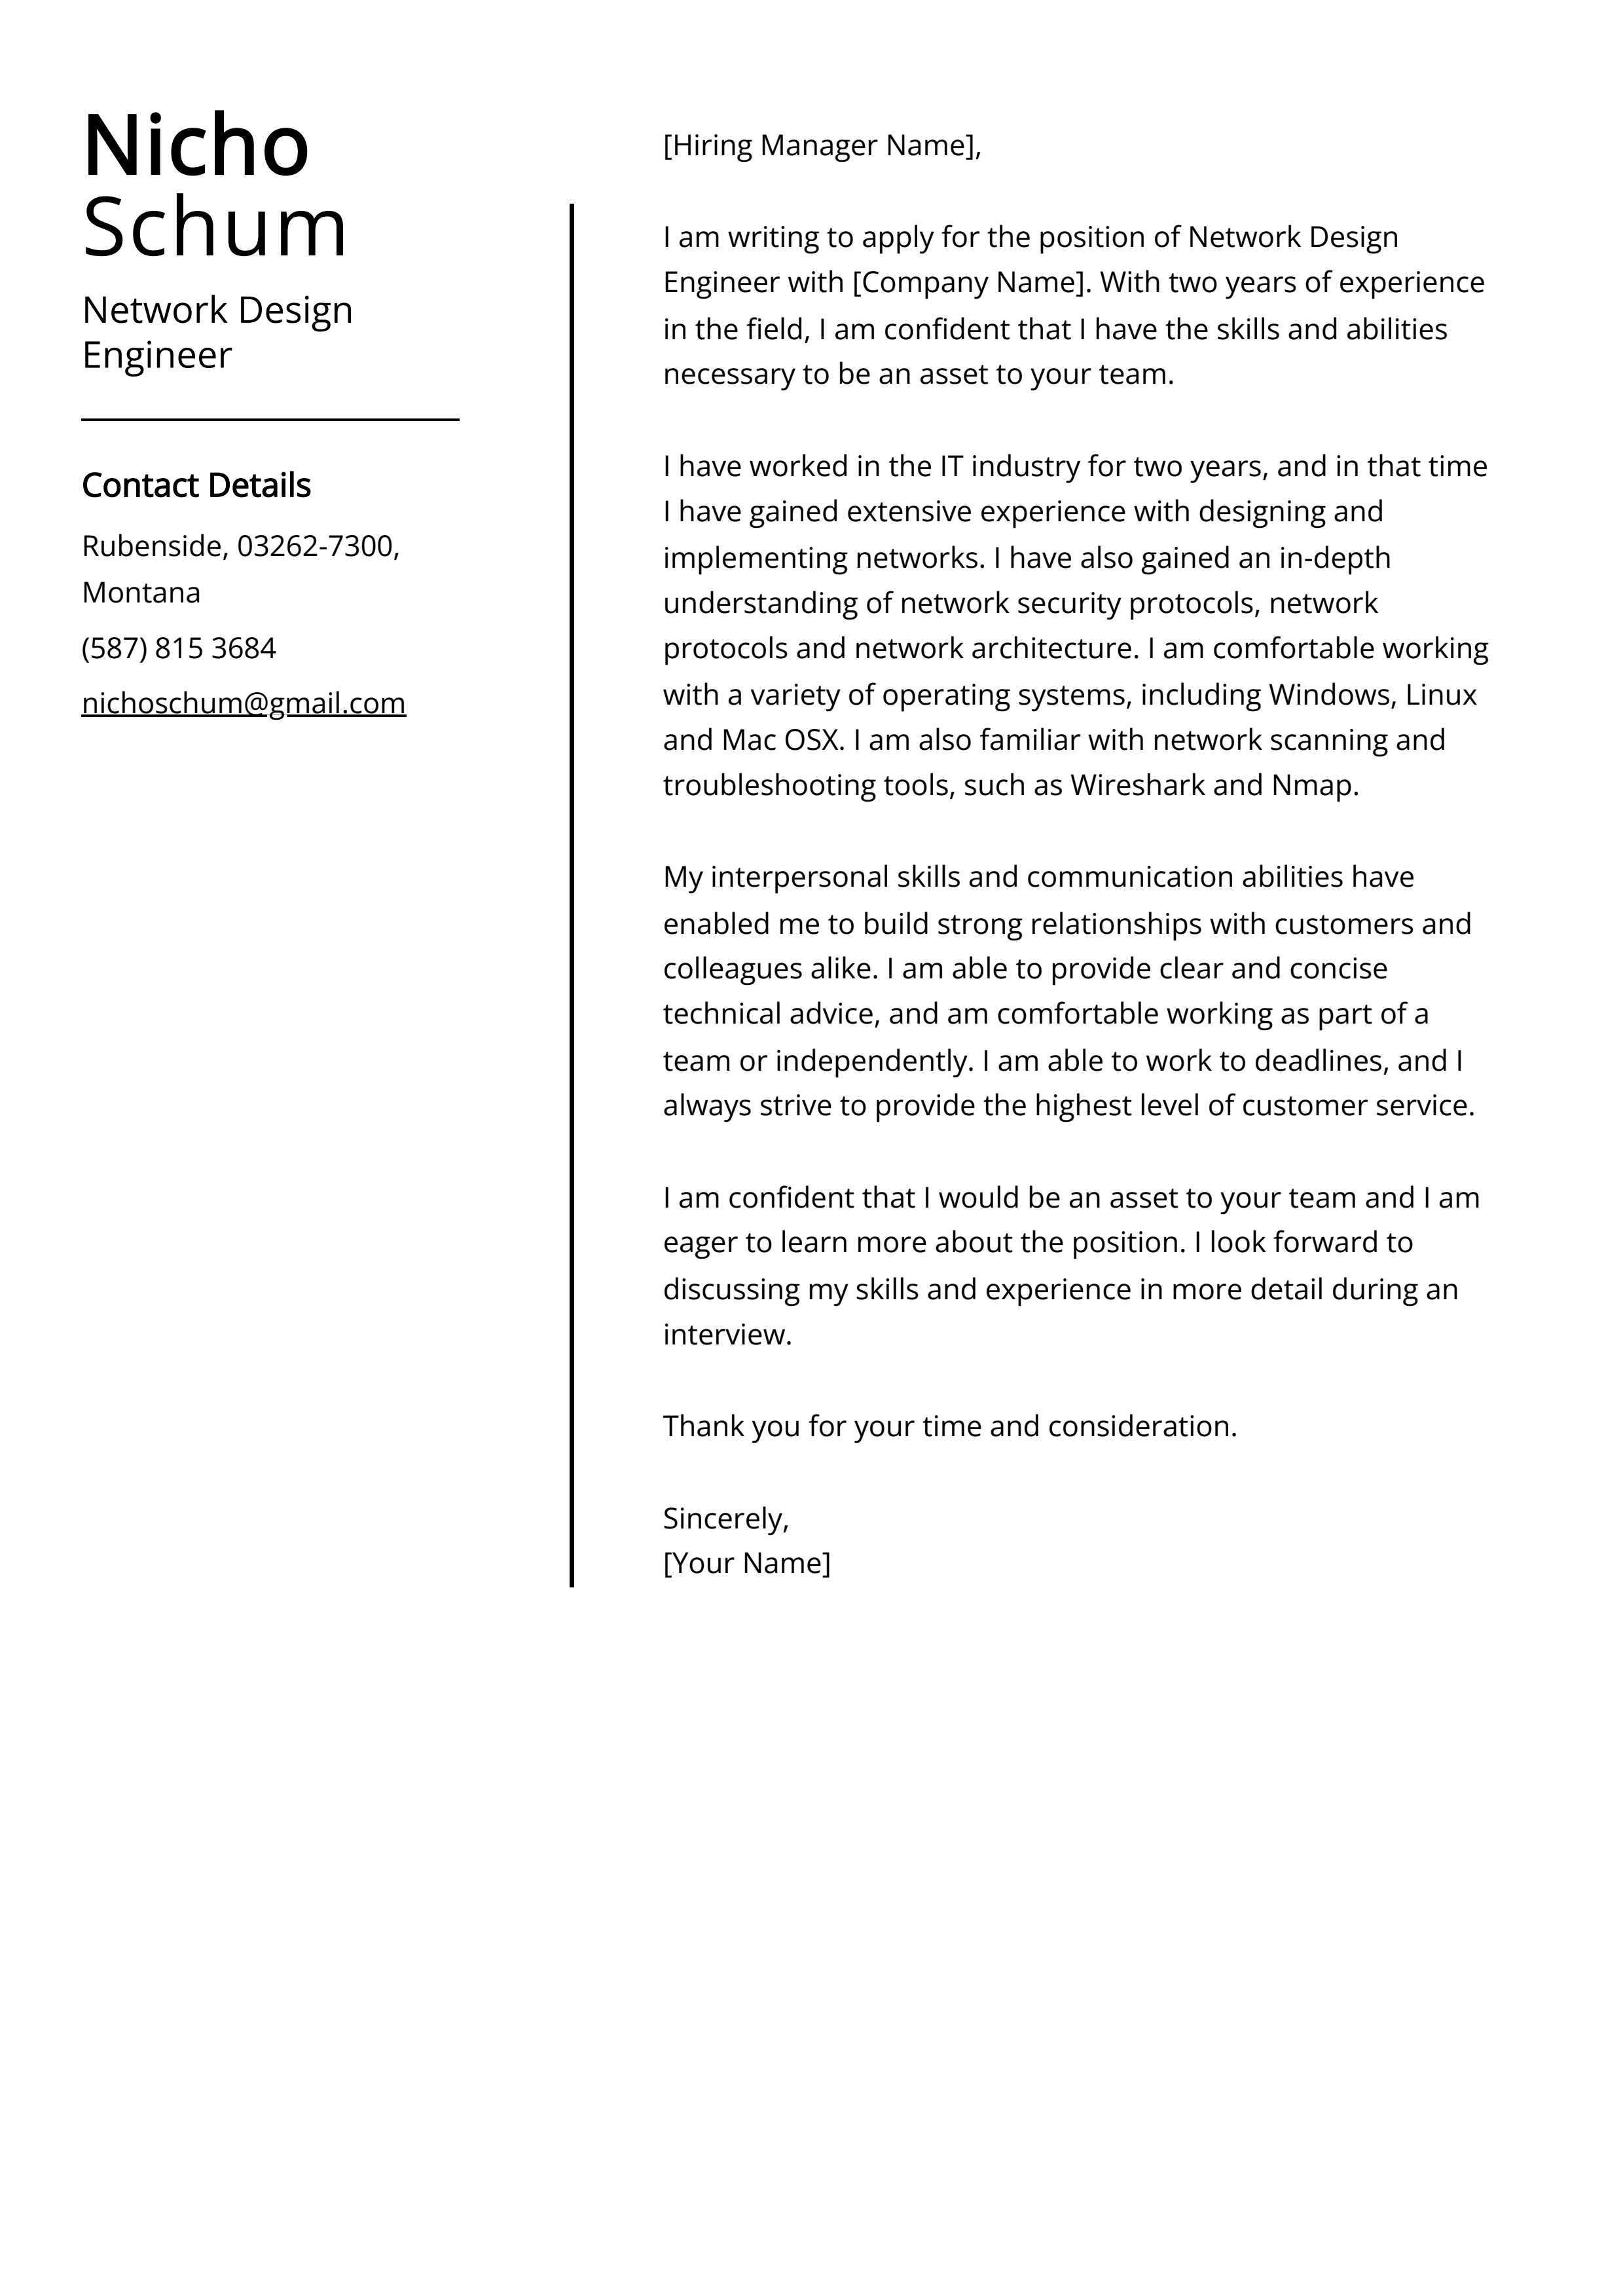 Network Design Engineer Cover Letter Example